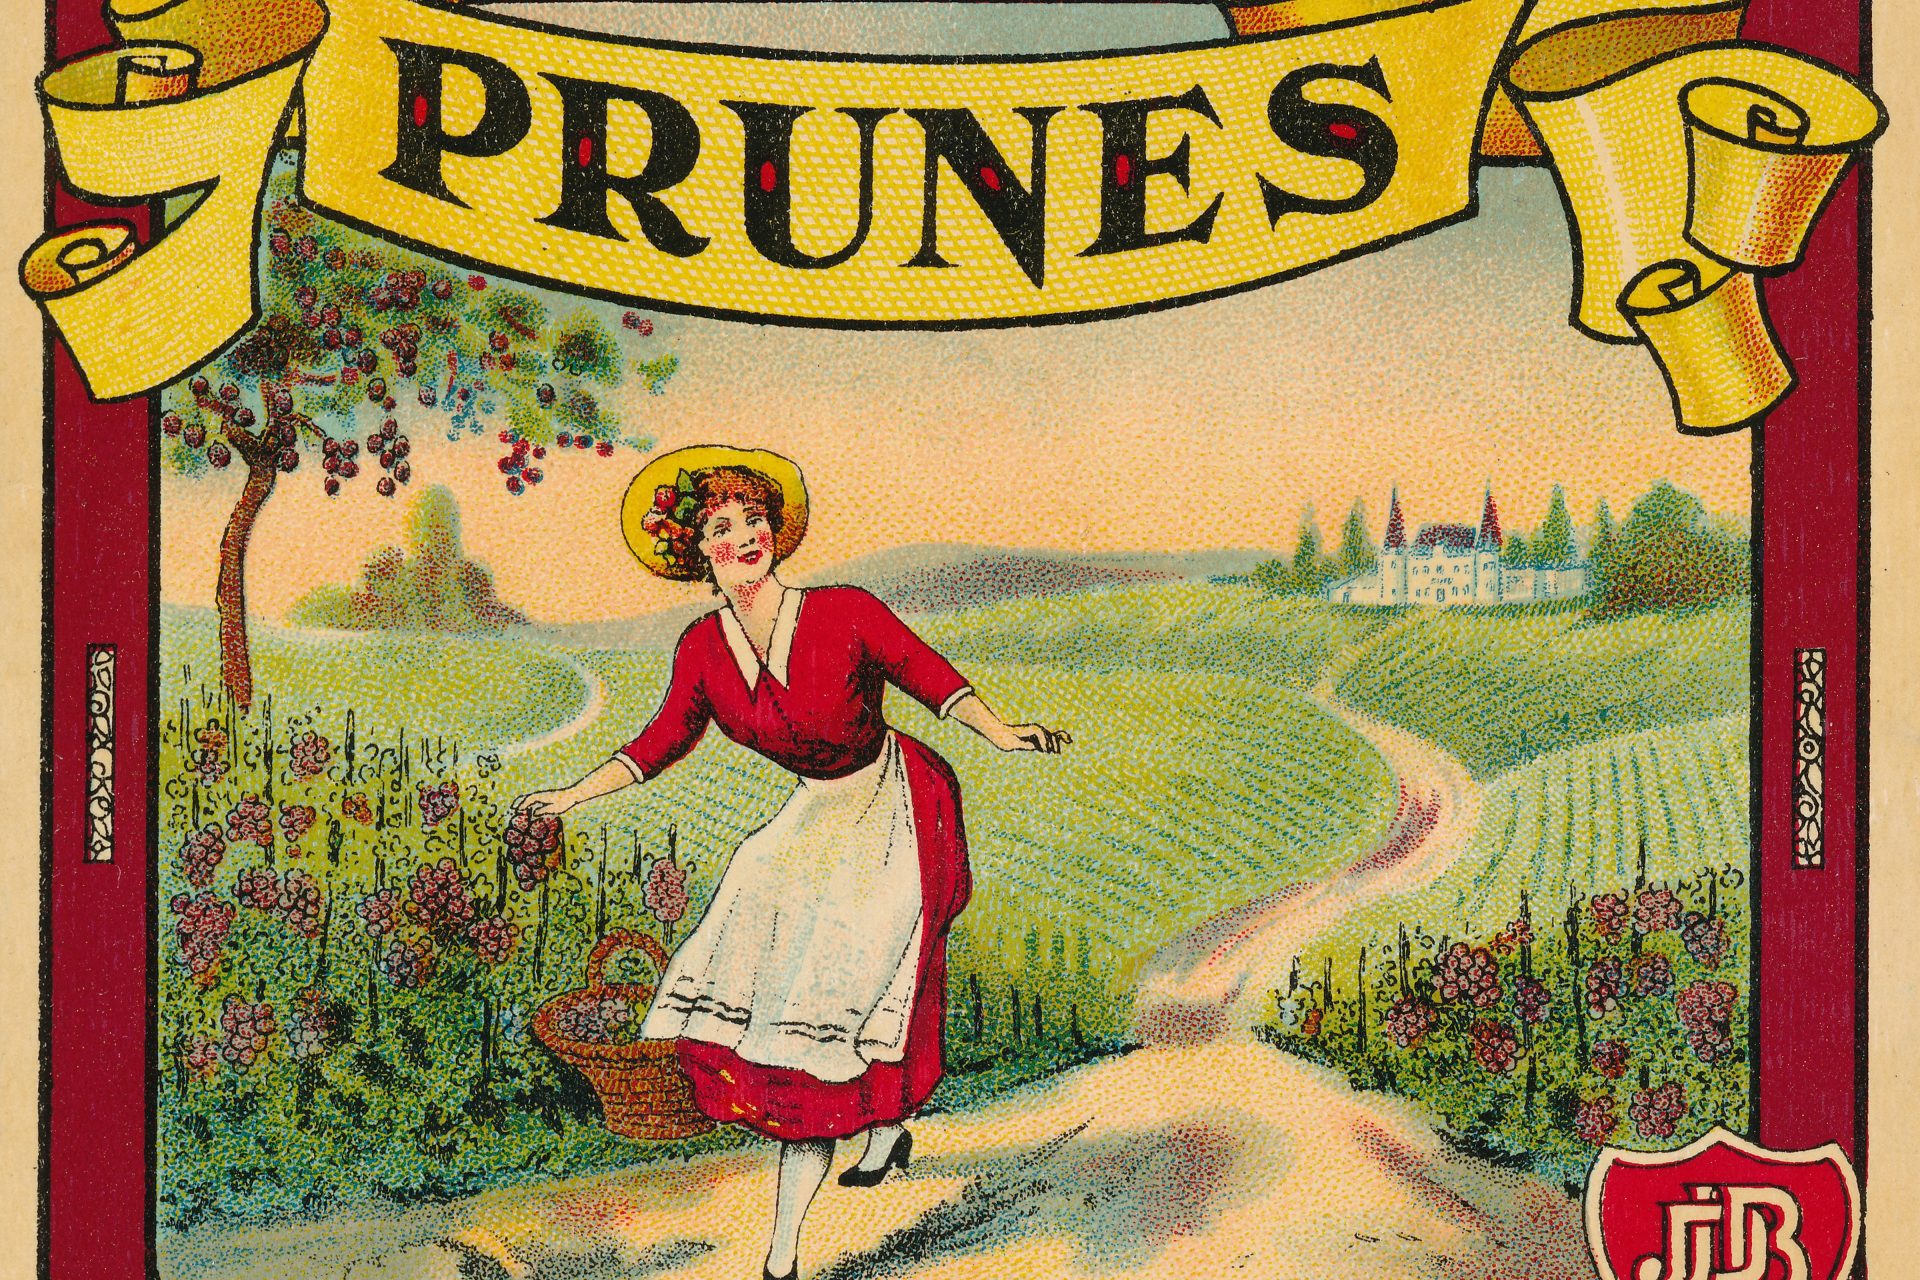 Prunes are back, baby!